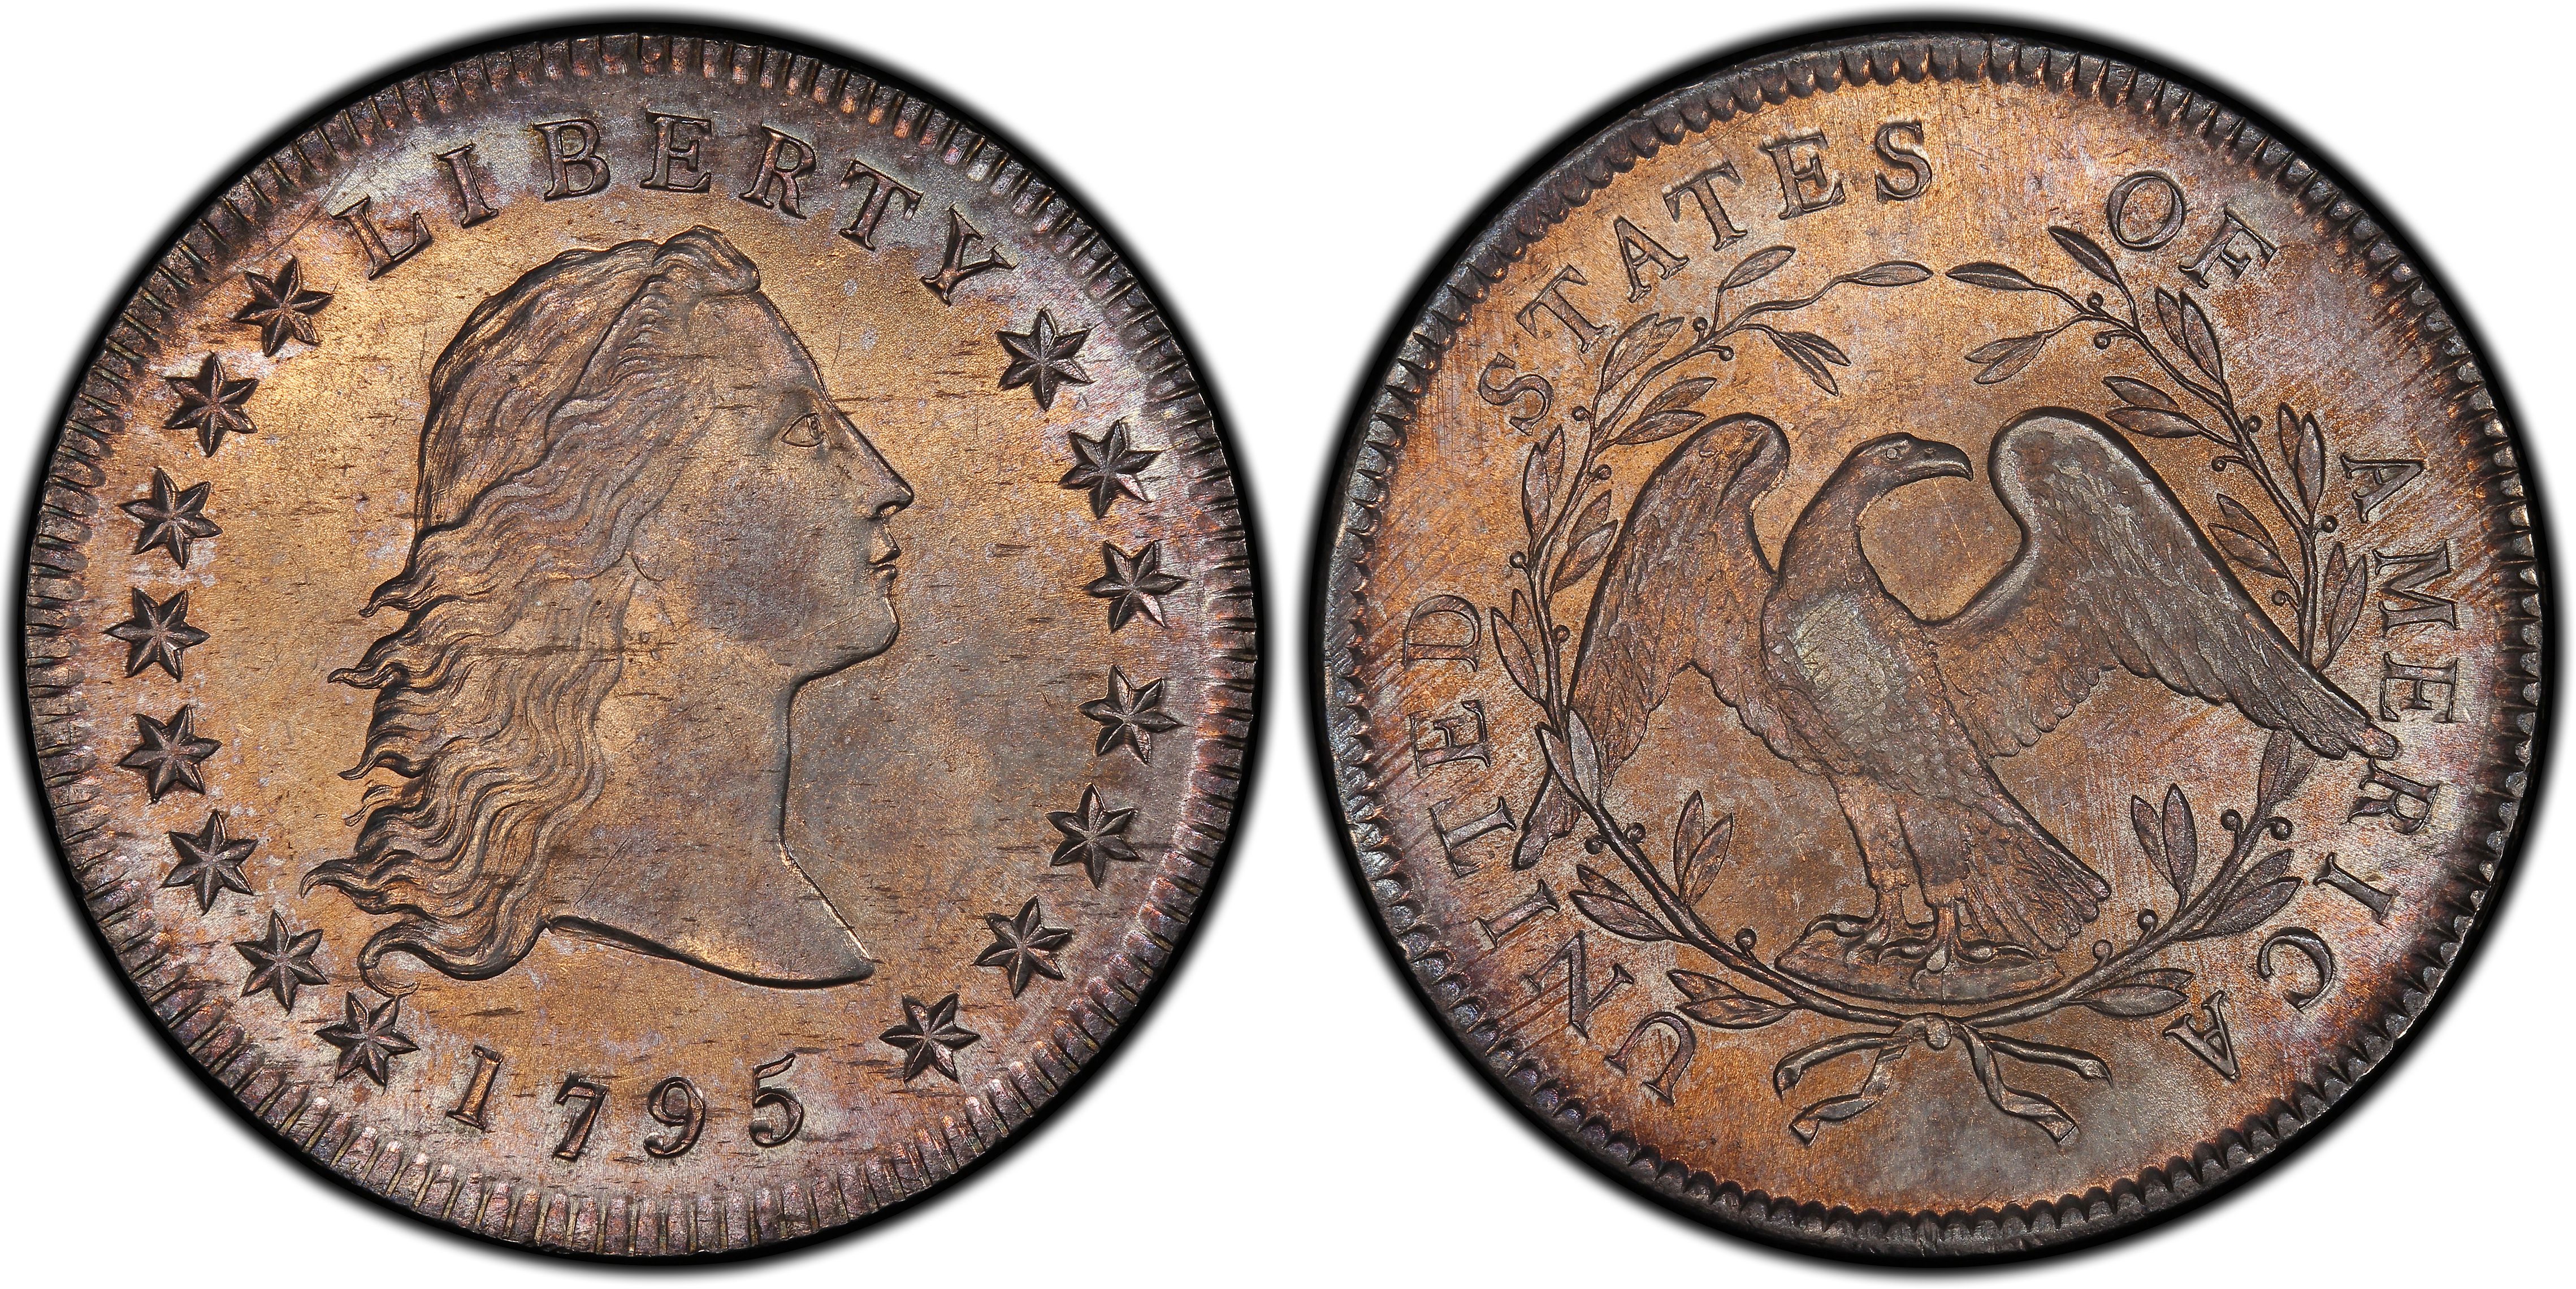 USA 1795 Flowing Hair Dollar Type 2 Copy Coins 